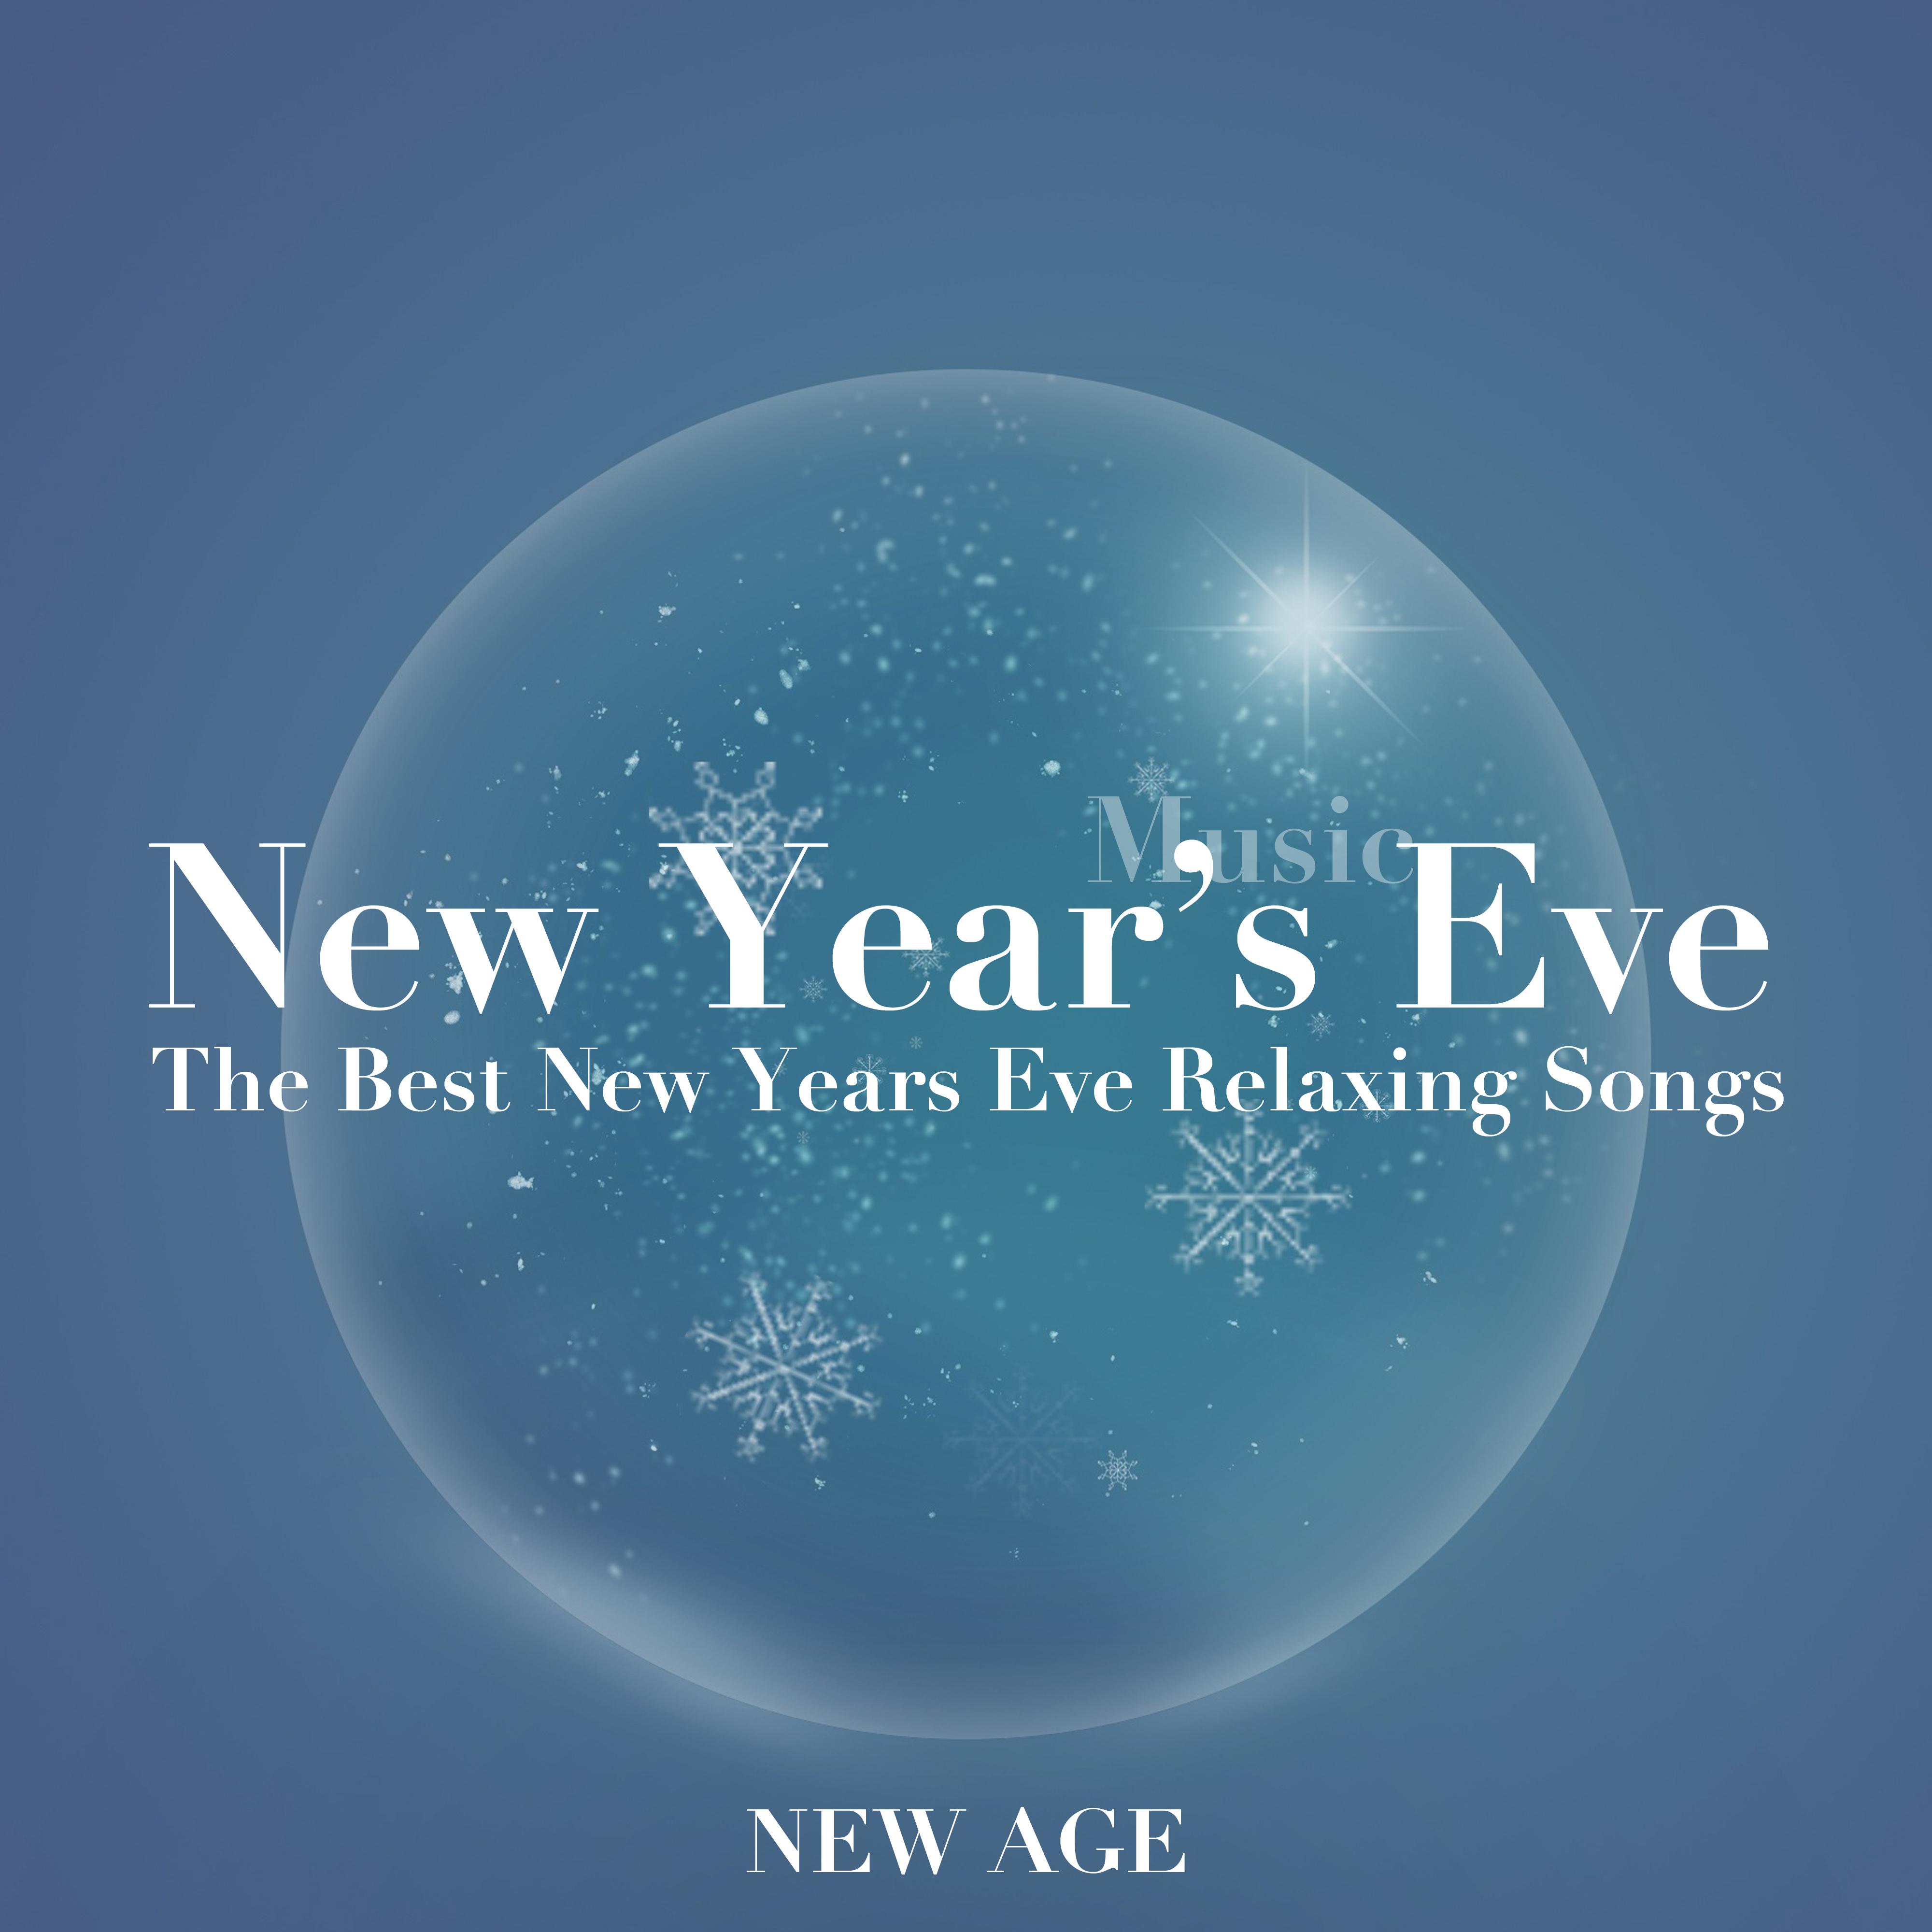 New Years Eve Music: The Best New Years Eve Relaxing Songs to Celebrate the Christmas Season